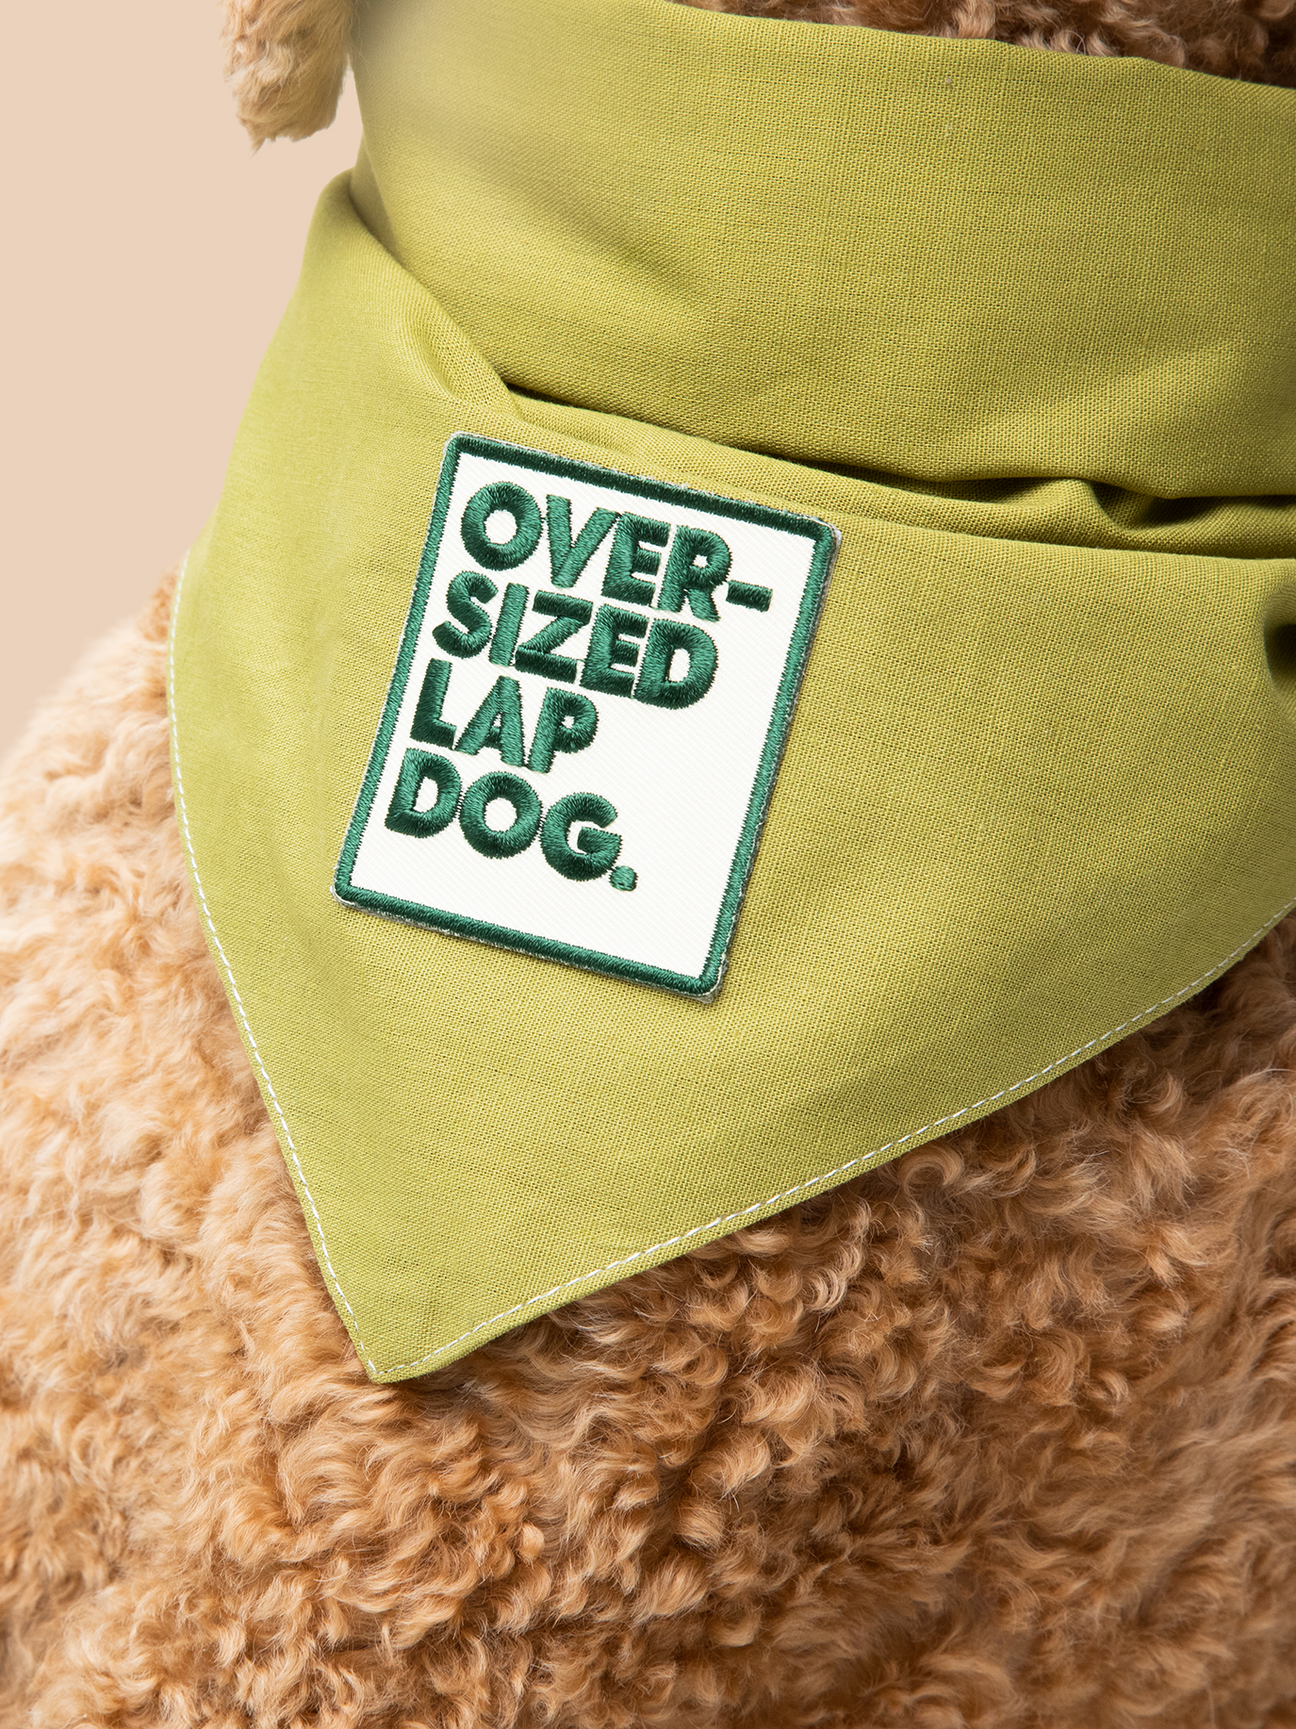 Scout's Honour "Oversized Lap Dog" Iron-On Patch - Henlo Pets